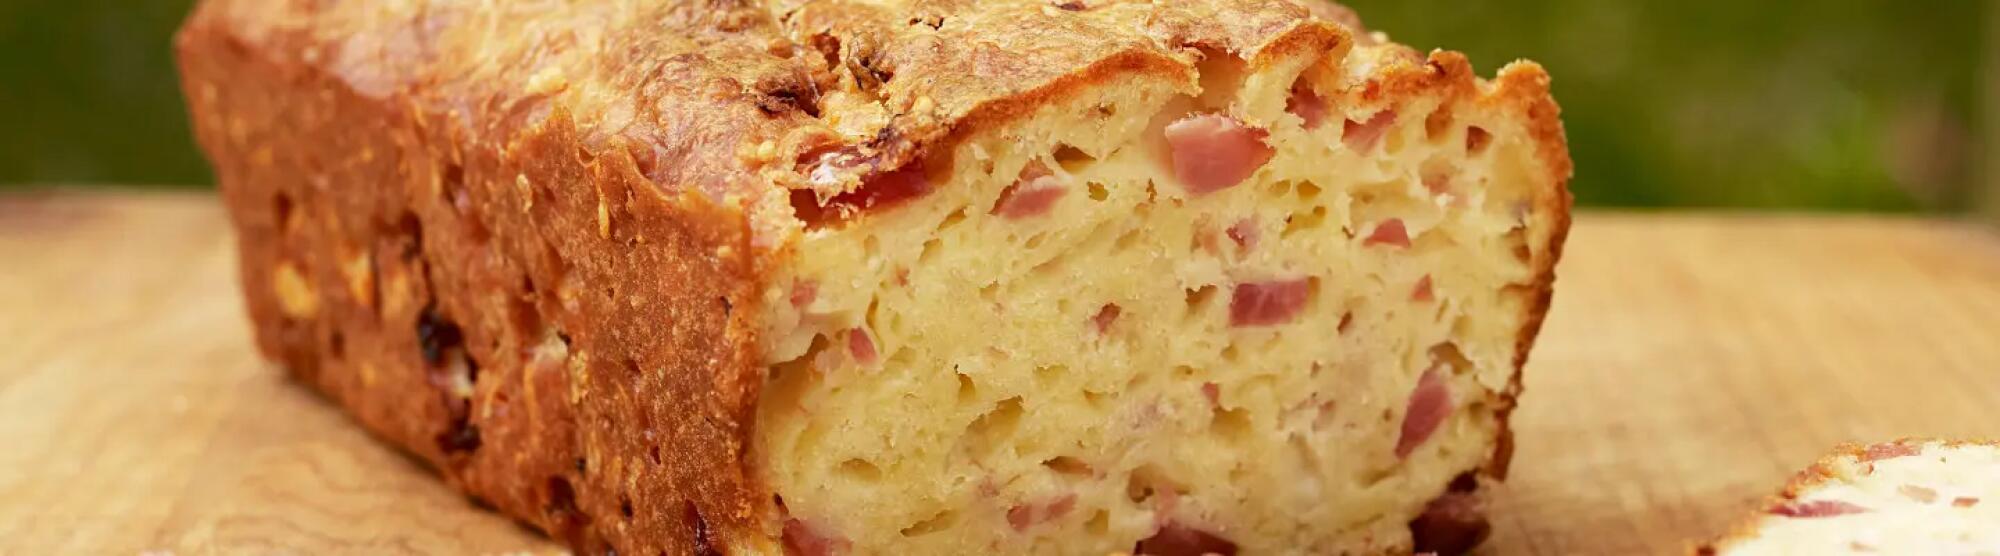 Recette : Cake jambon fromage